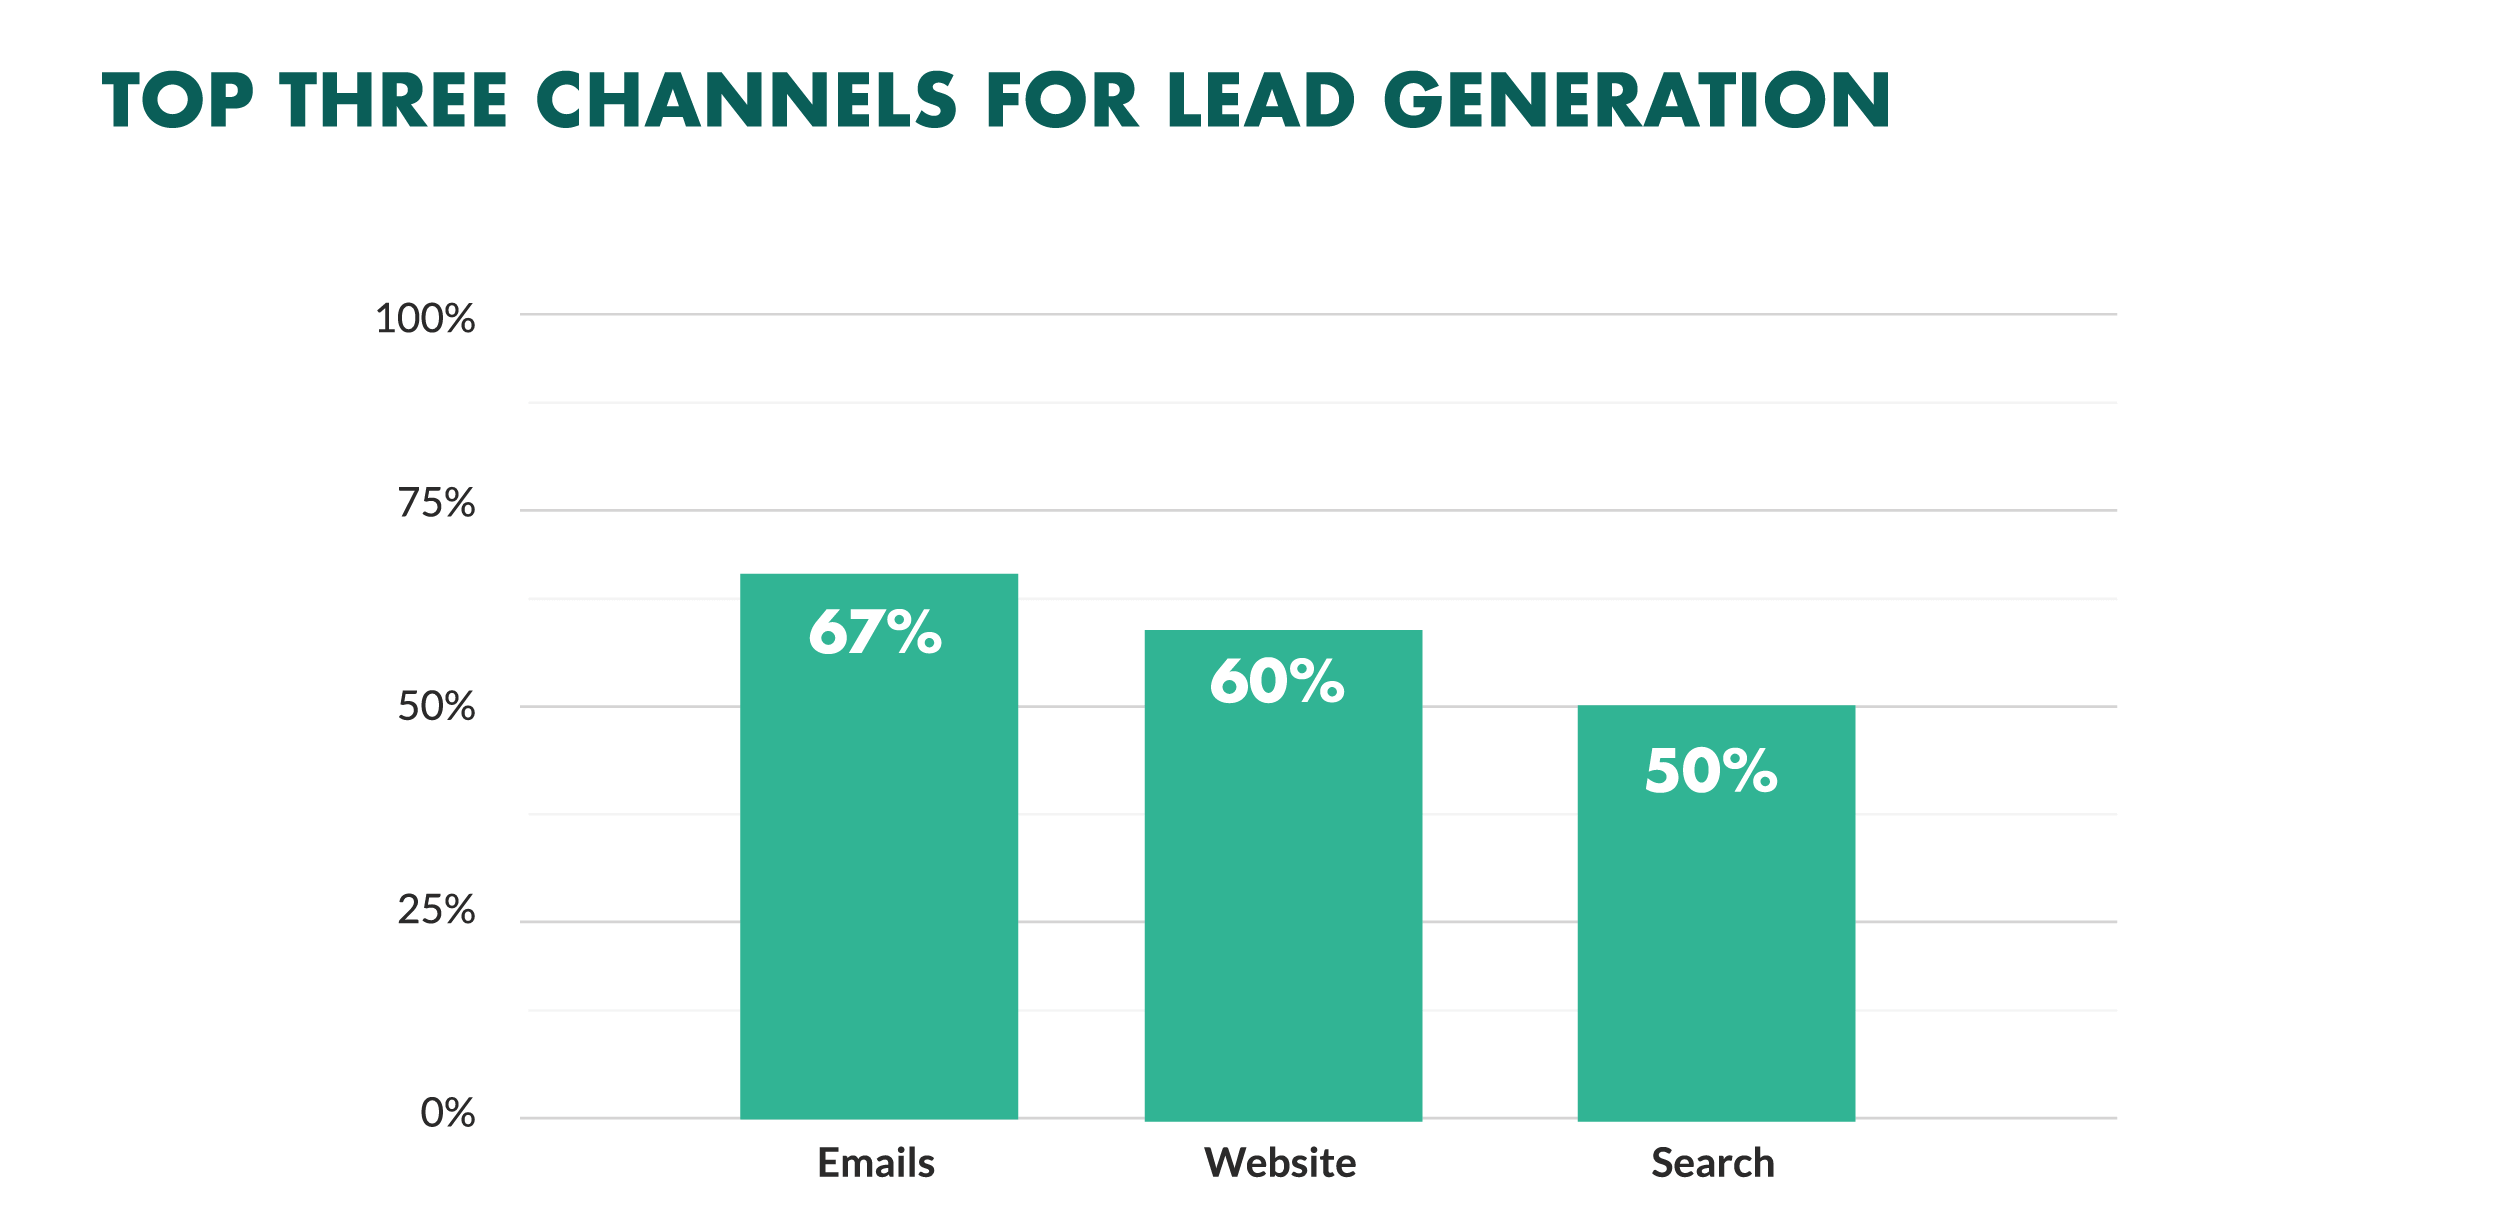 The most effective channels for lead generation